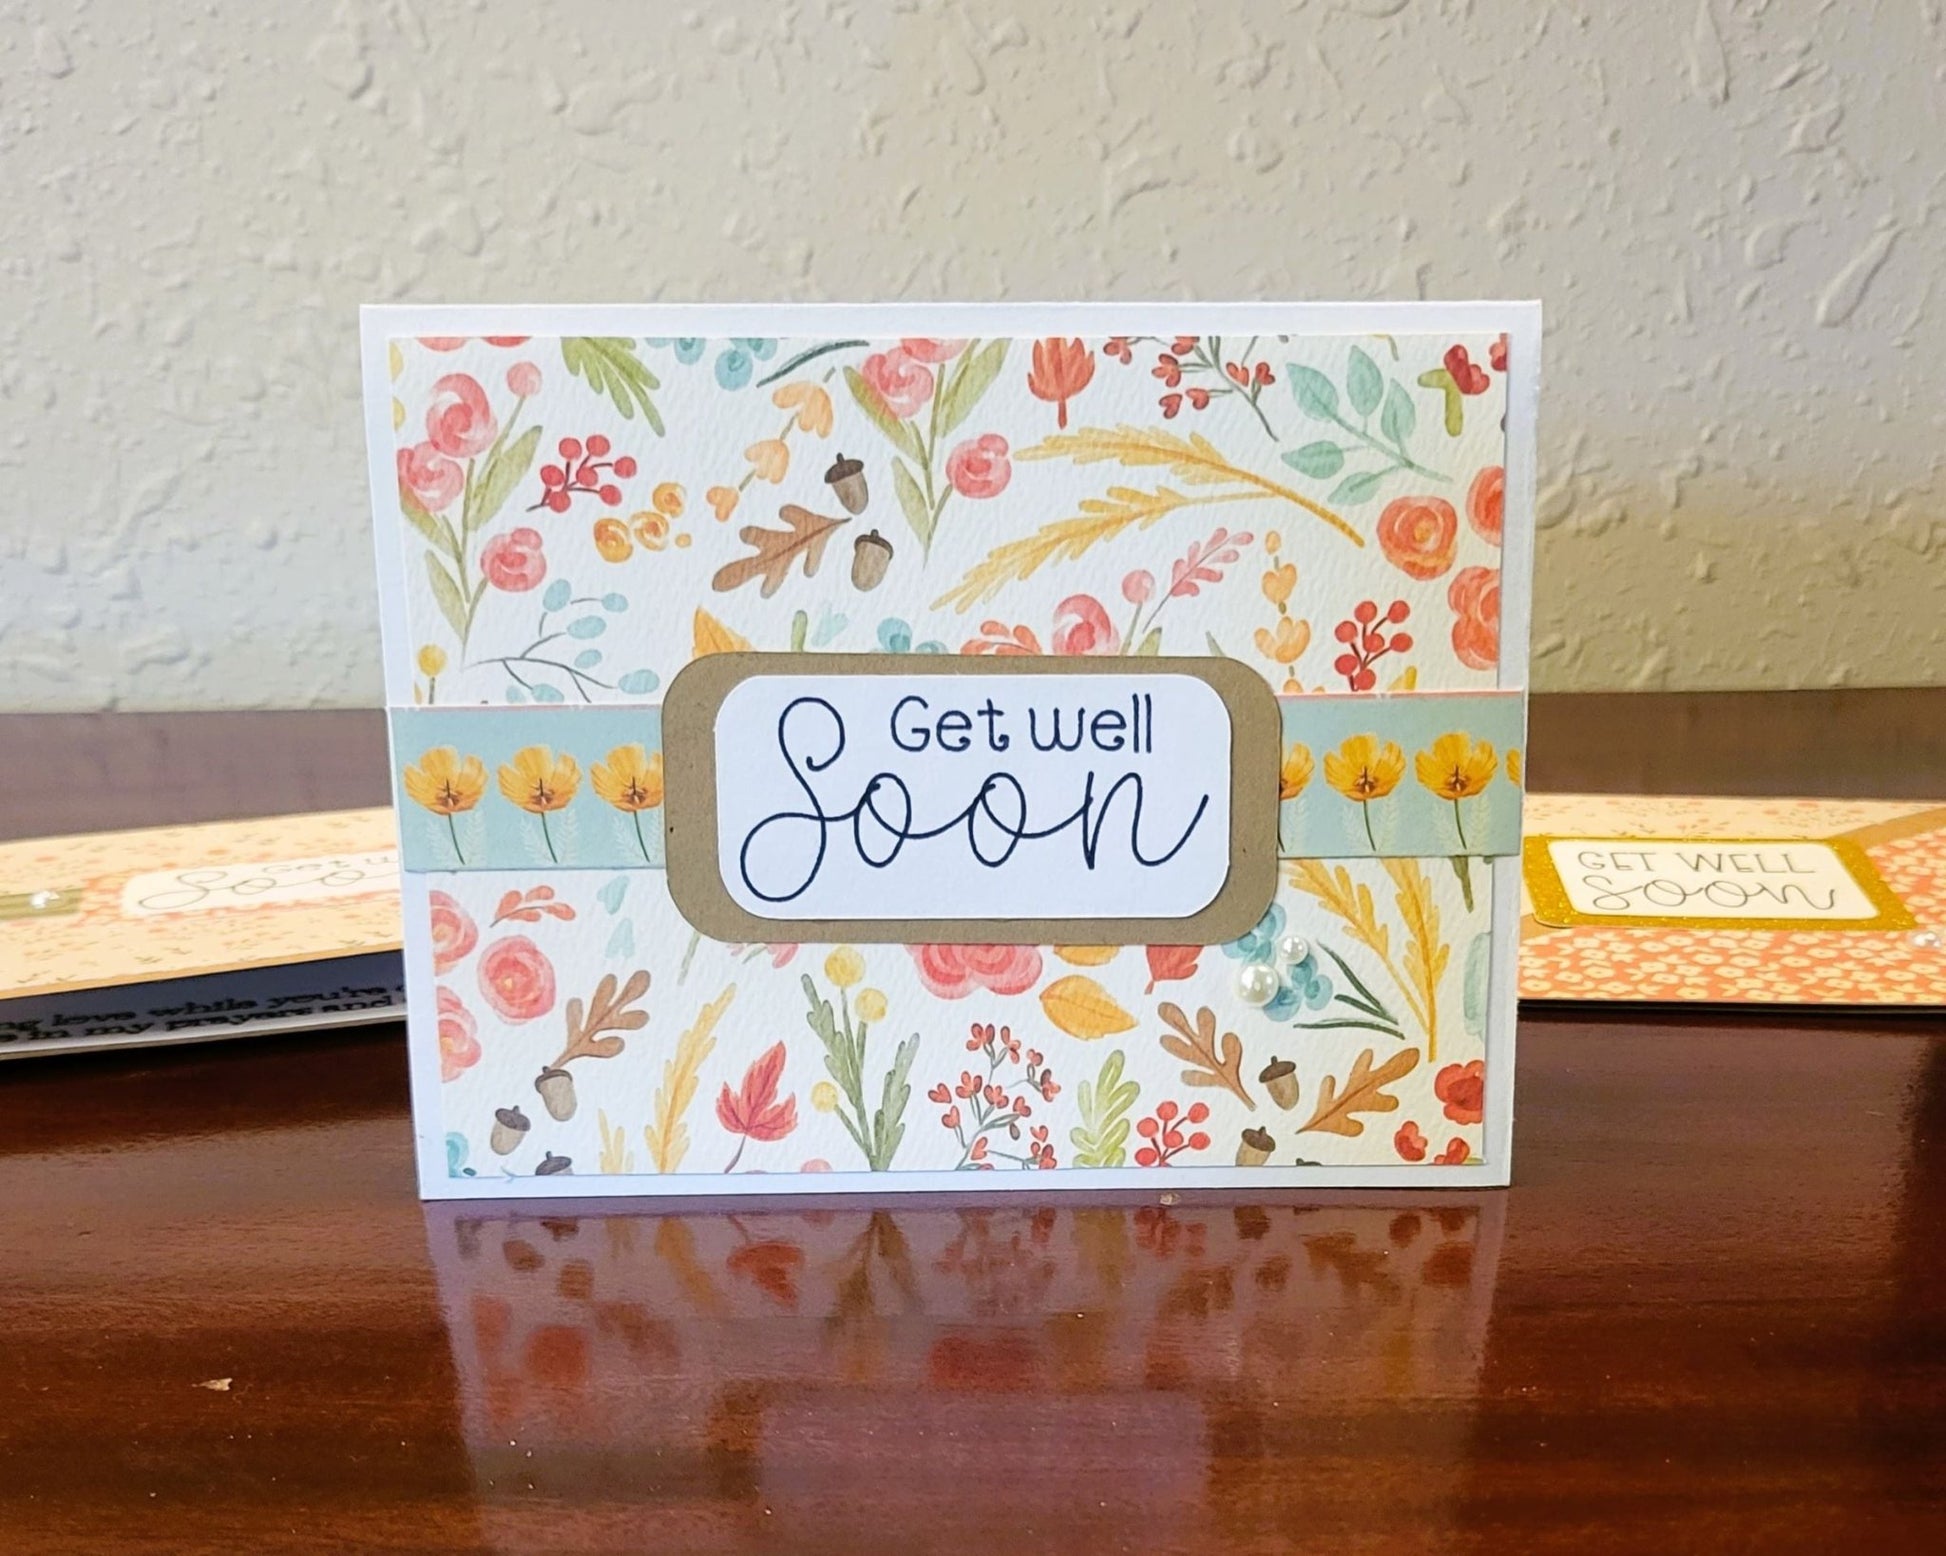 Get Well Soon, Autumn Florals - Be Well Collection - Handmade Greeting Card - 31 Rubies Designs